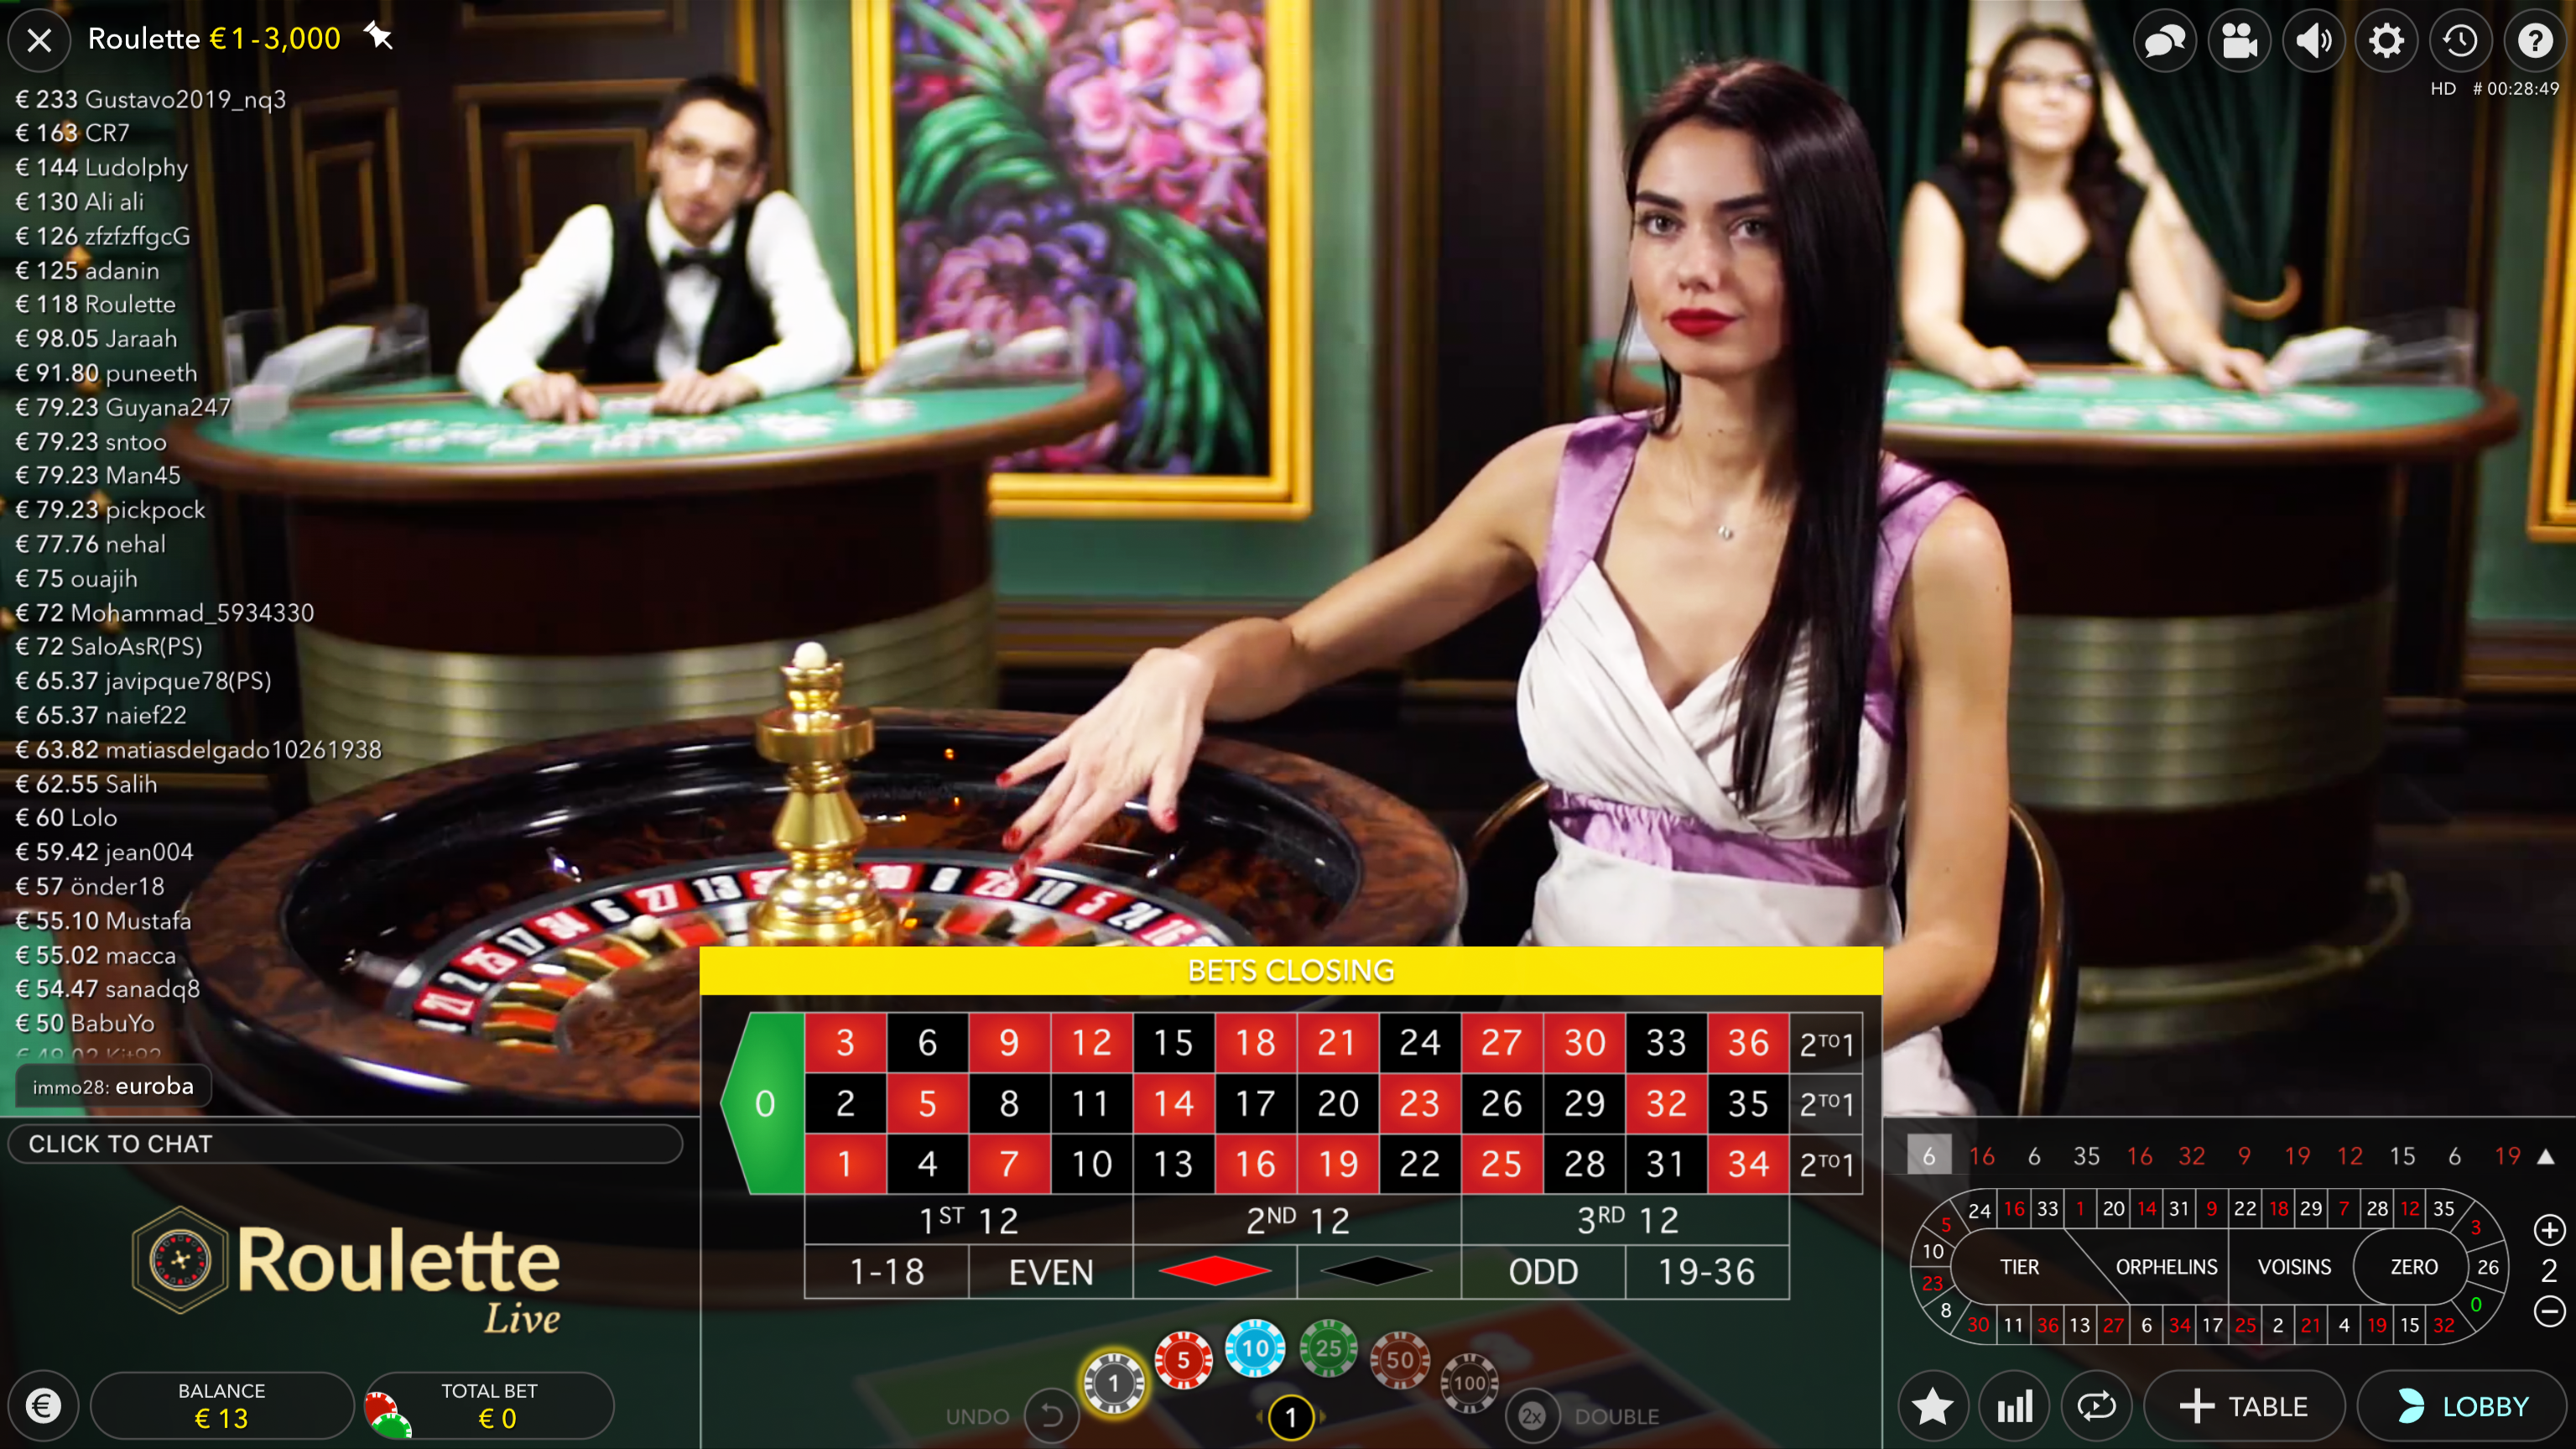 How To Play Online Casino In United States